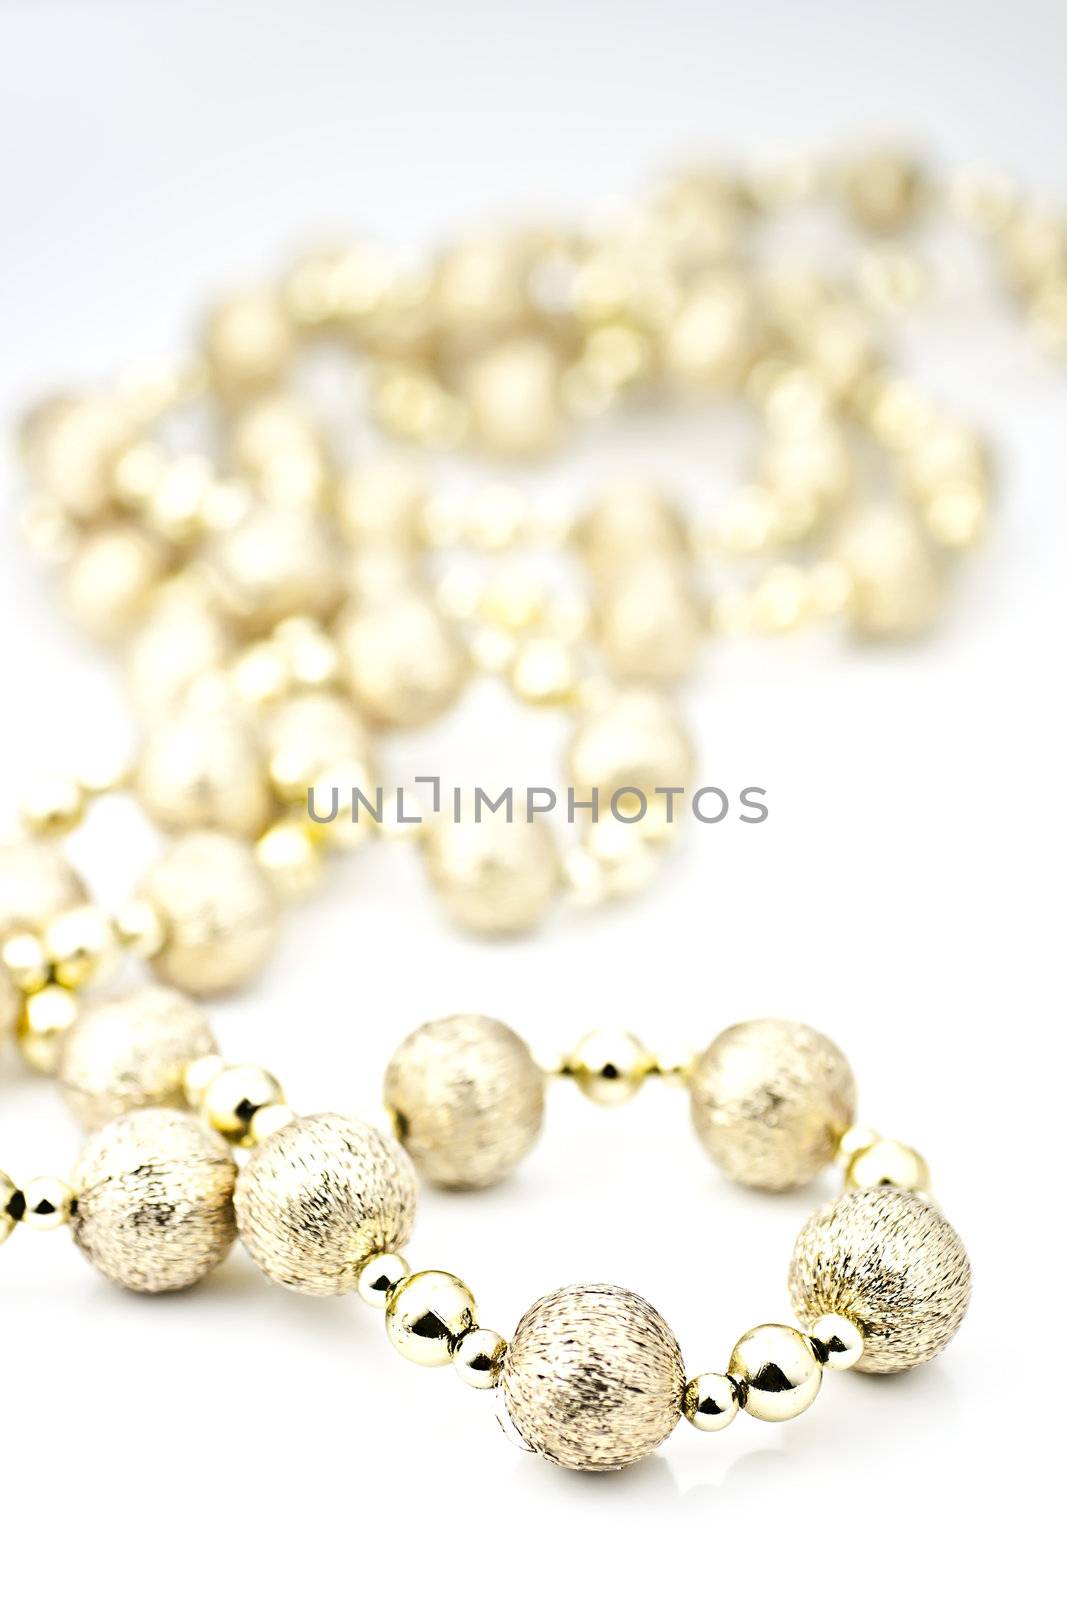 Decorative ball chains. by gitusik